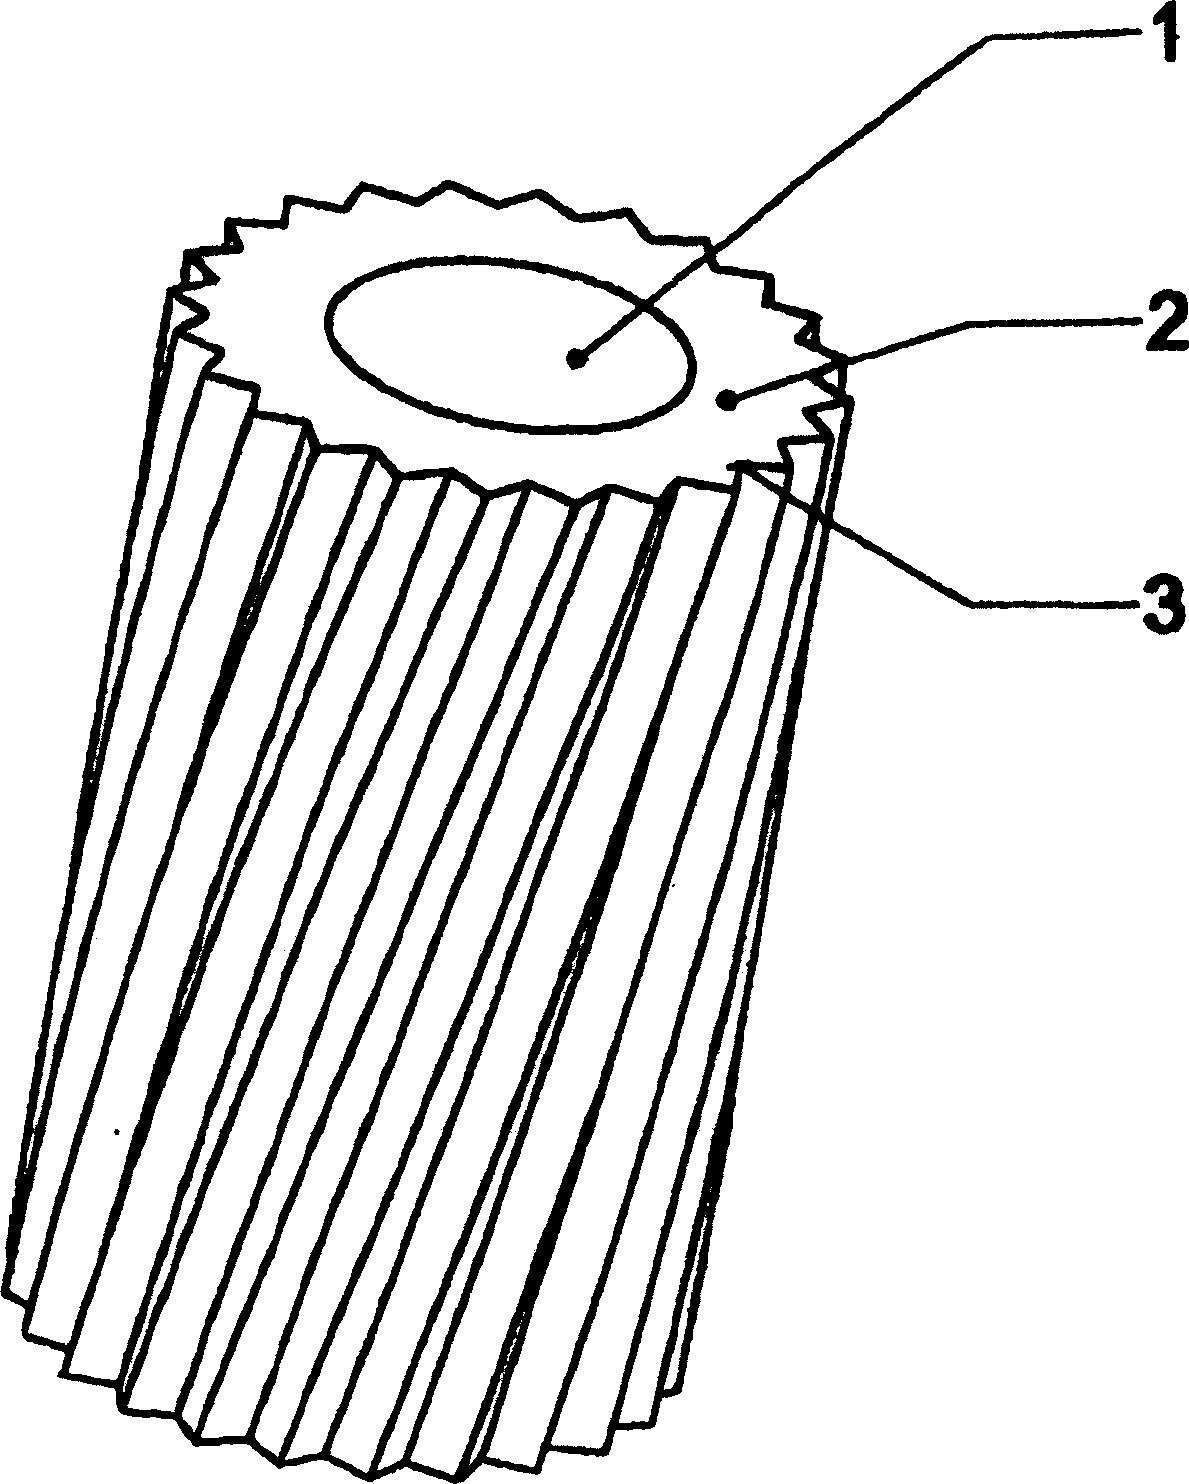 Welding electrode with structural surface